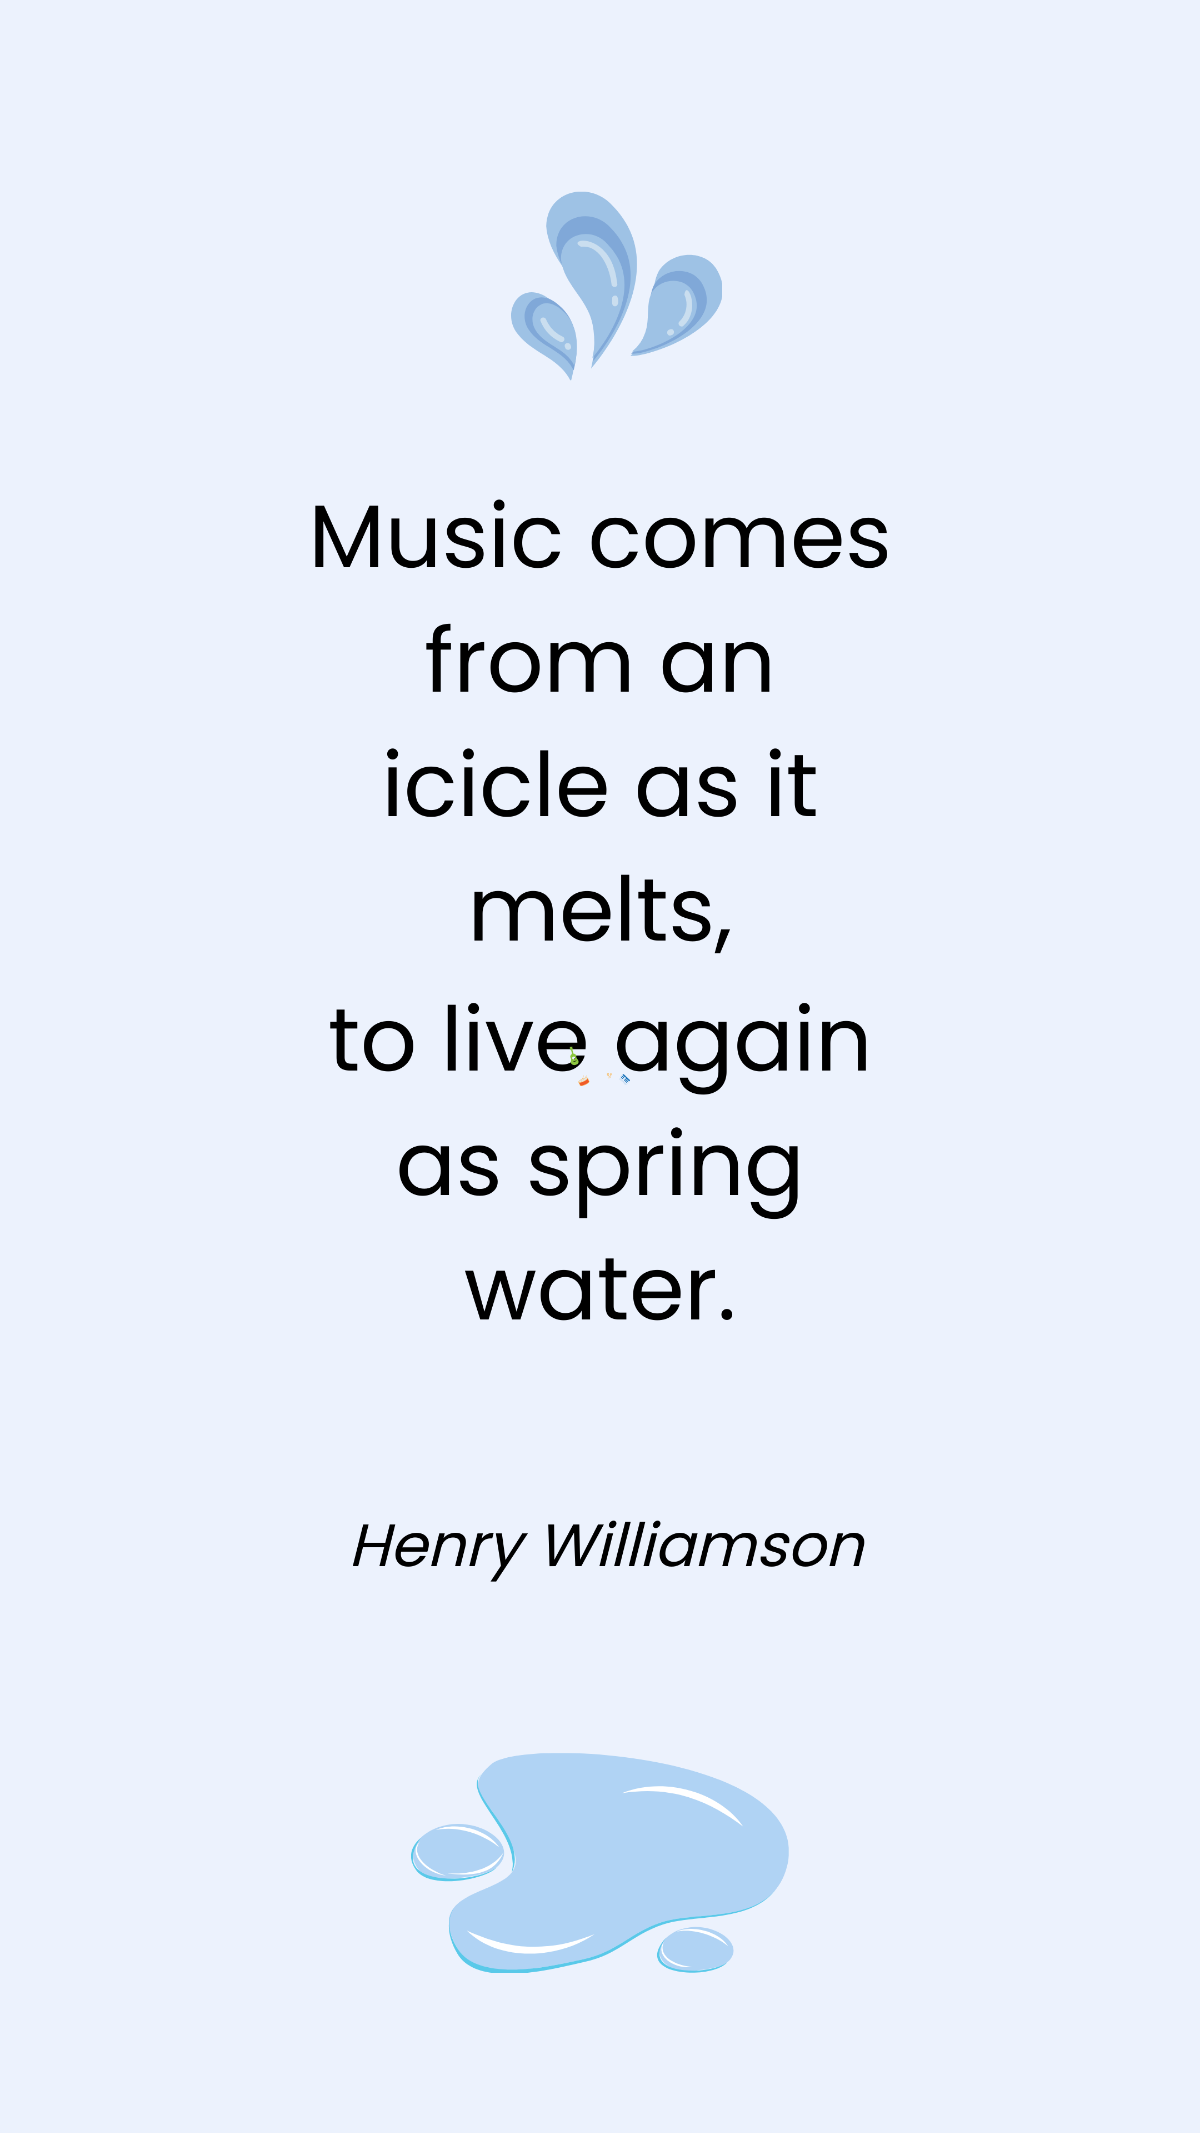 Henry Williamson - Music comes from an icicle as it melts, to live again as spring water. Template